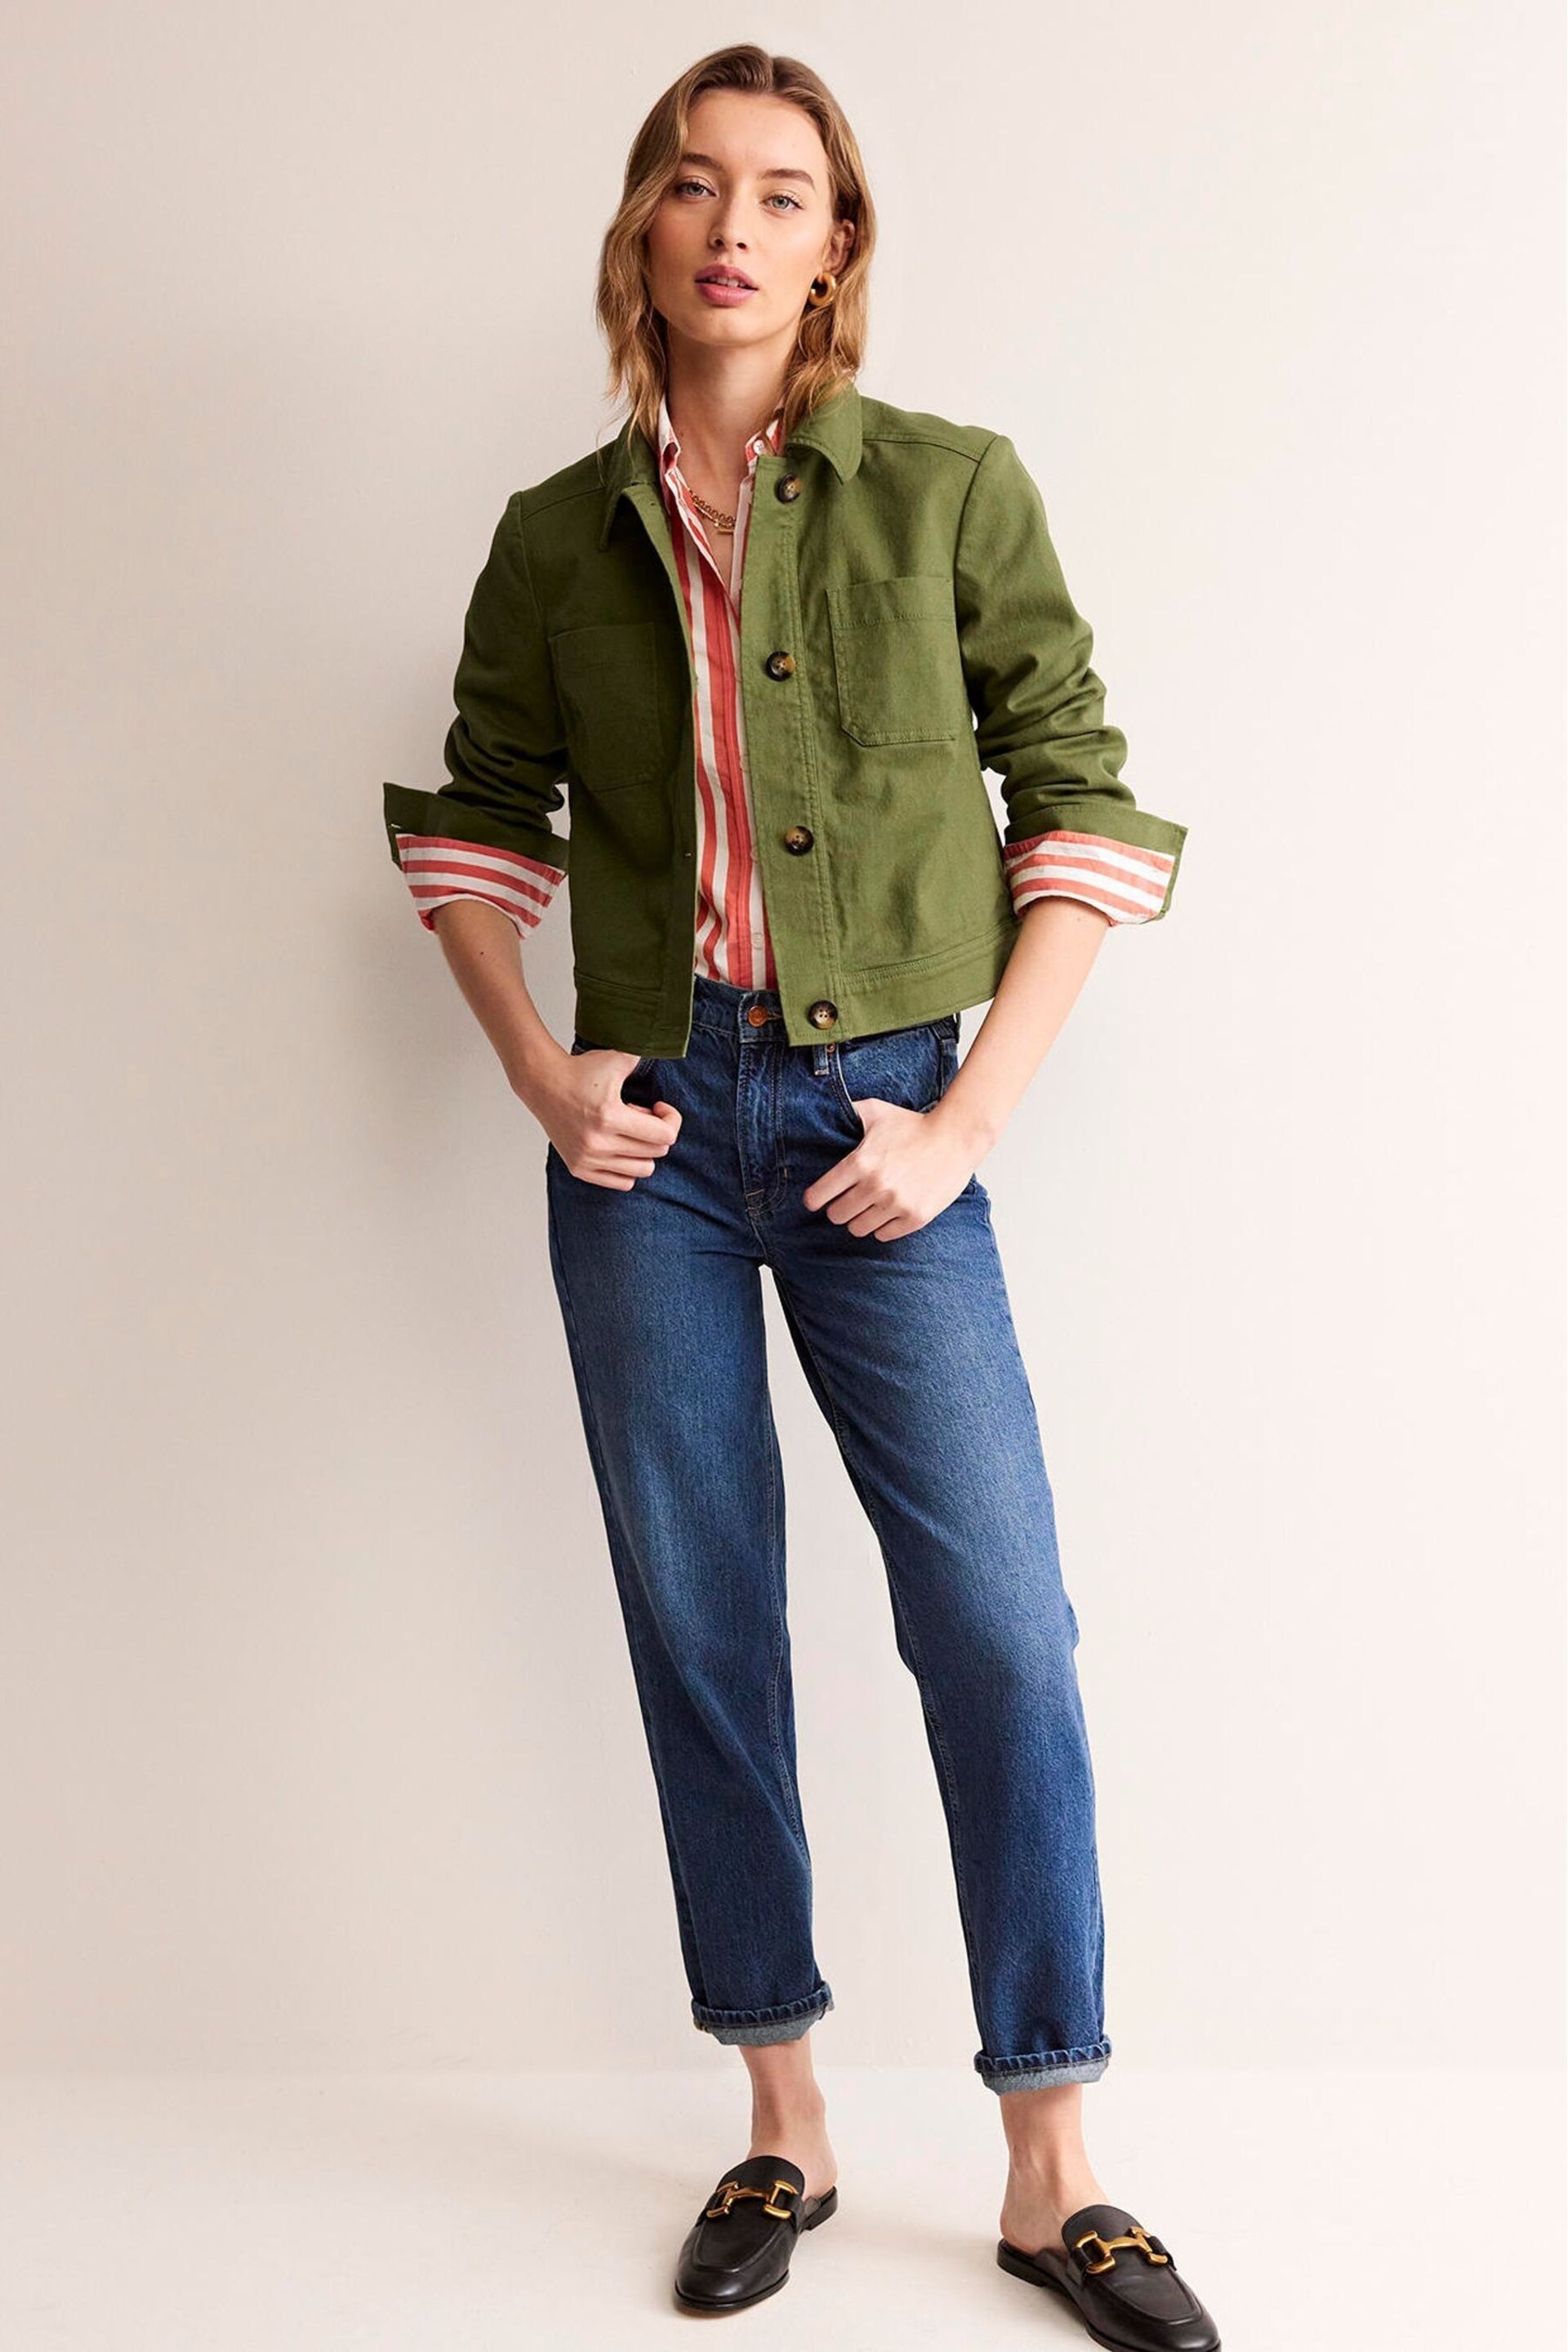 Boden Green Casual Crop Jacket - Image 5 of 6